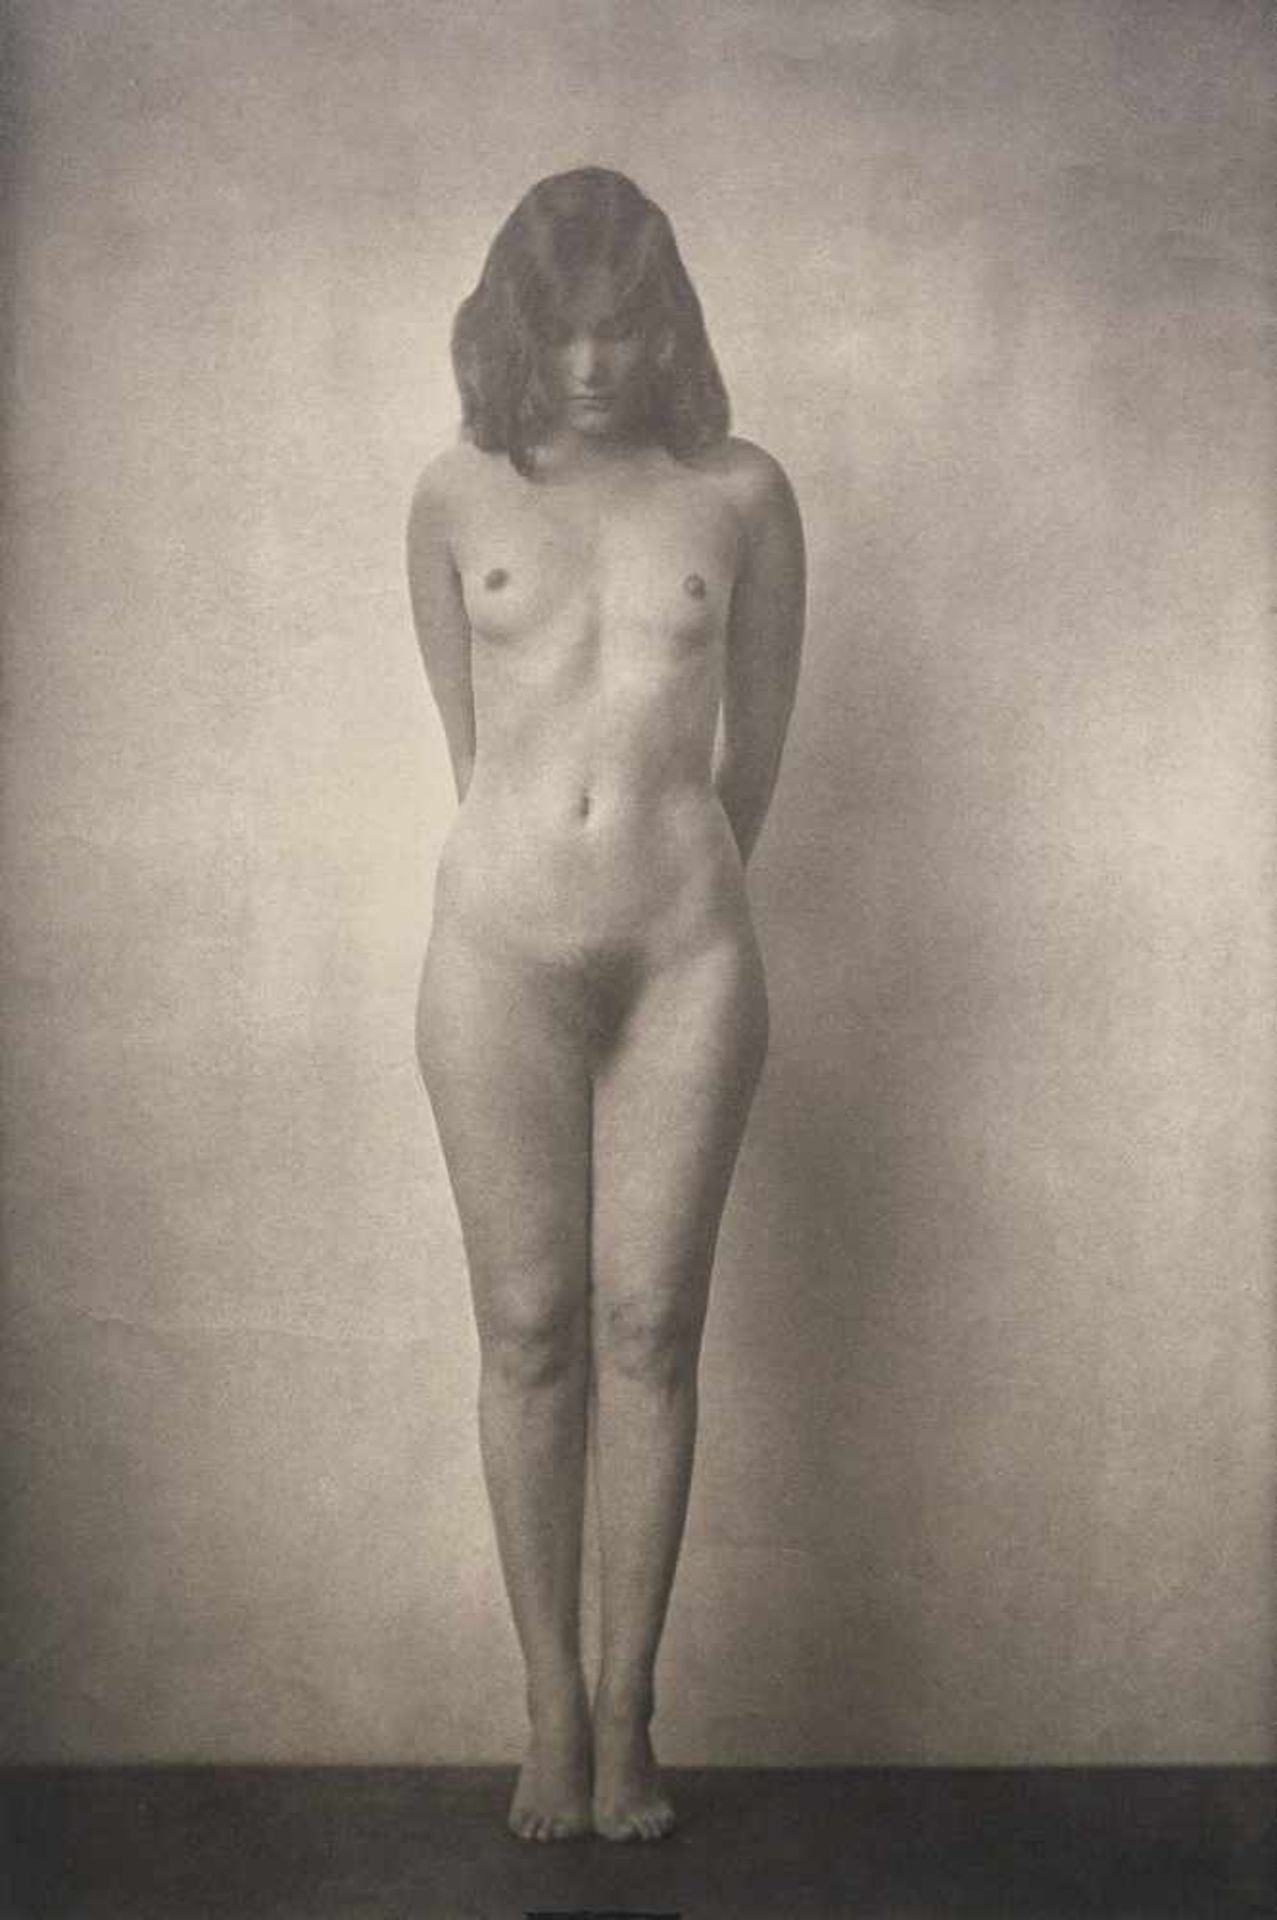 Goodwin, Henry Buergel: Female nudeFemale nude. Circa 1918. Vintage gelatin silver print on strong